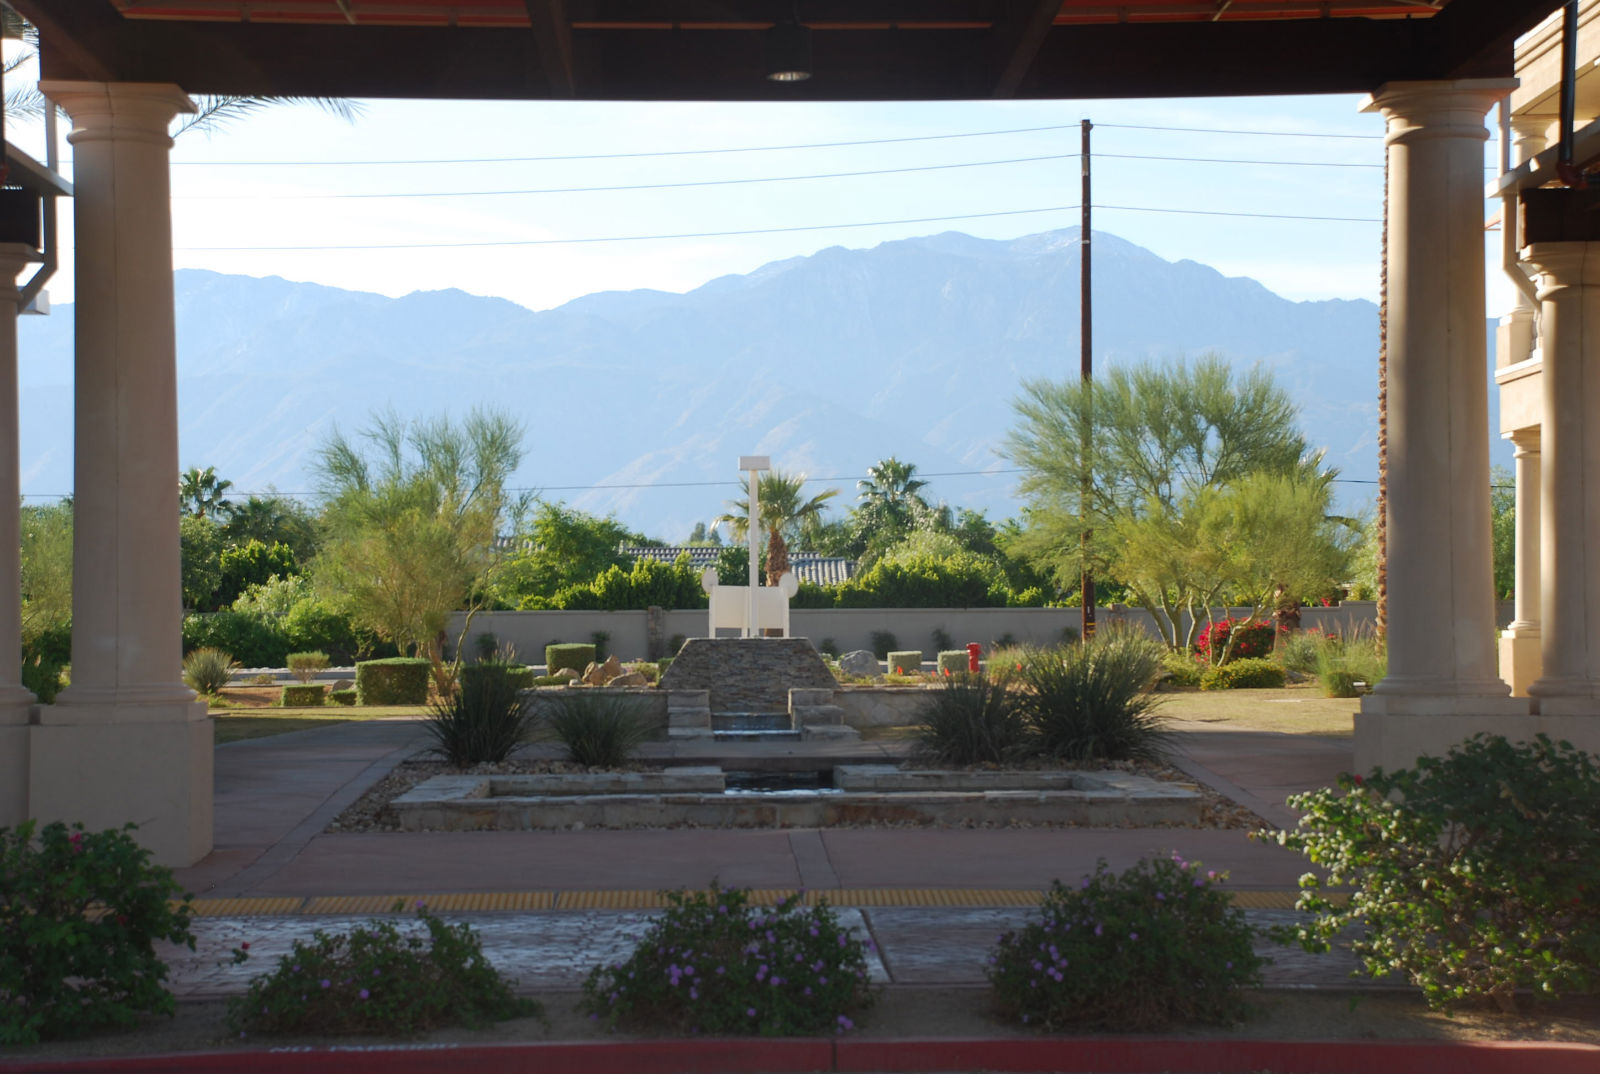 Porte-cochere for disabled patients, behind the majestic Rancho Mirage mountain range.